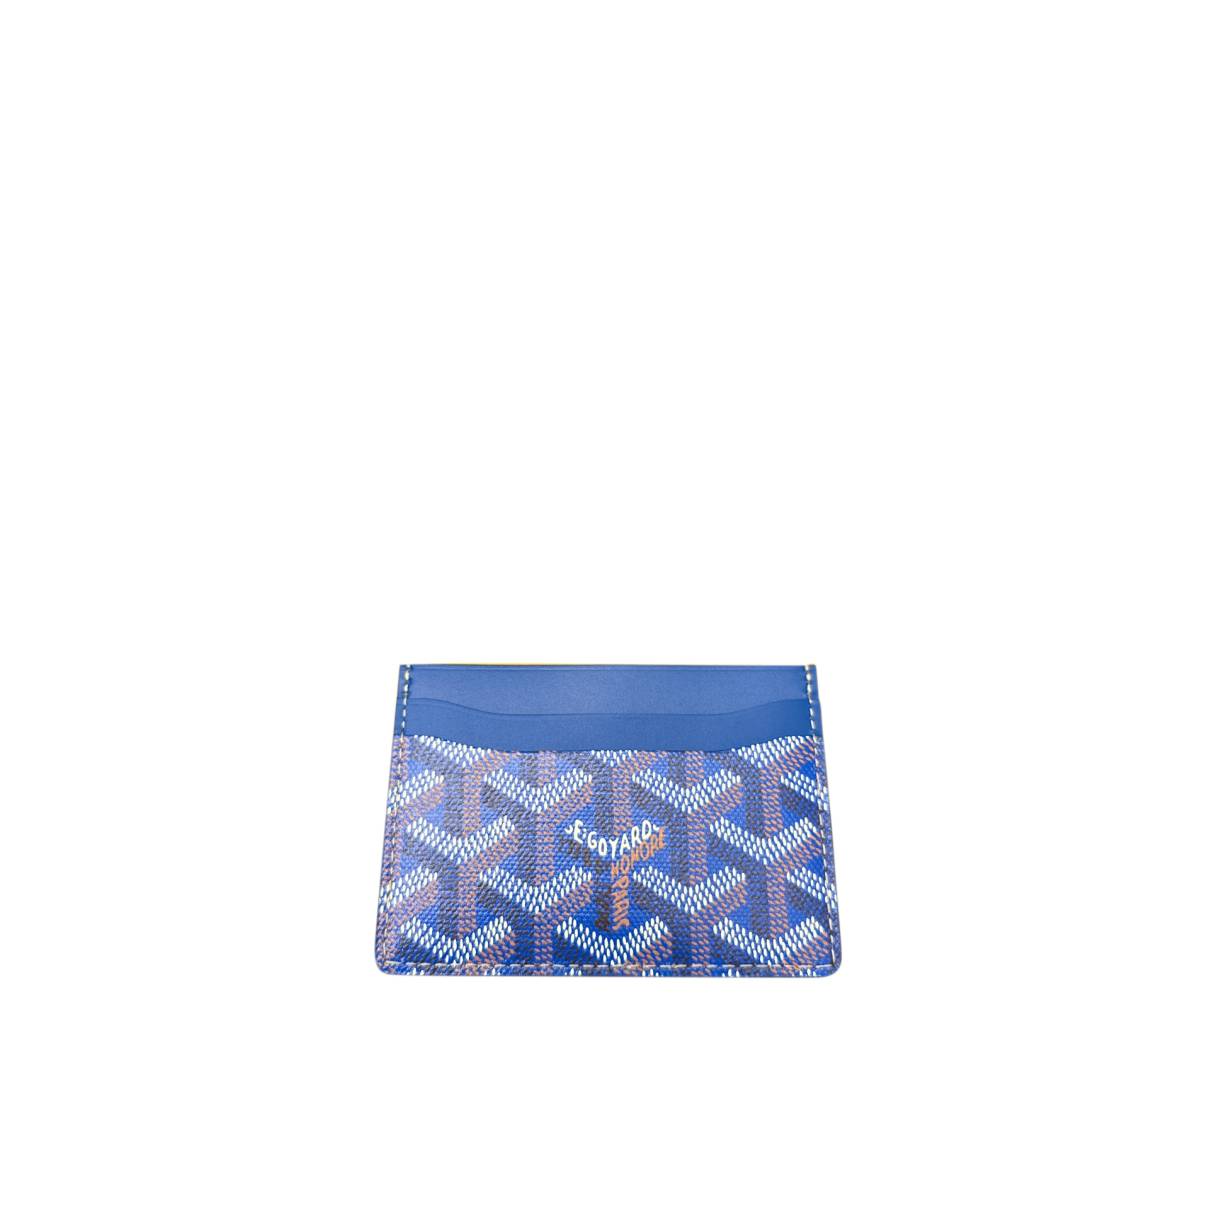 Saint sulpice leather small bag Goyard Blue in Leather - 36350379